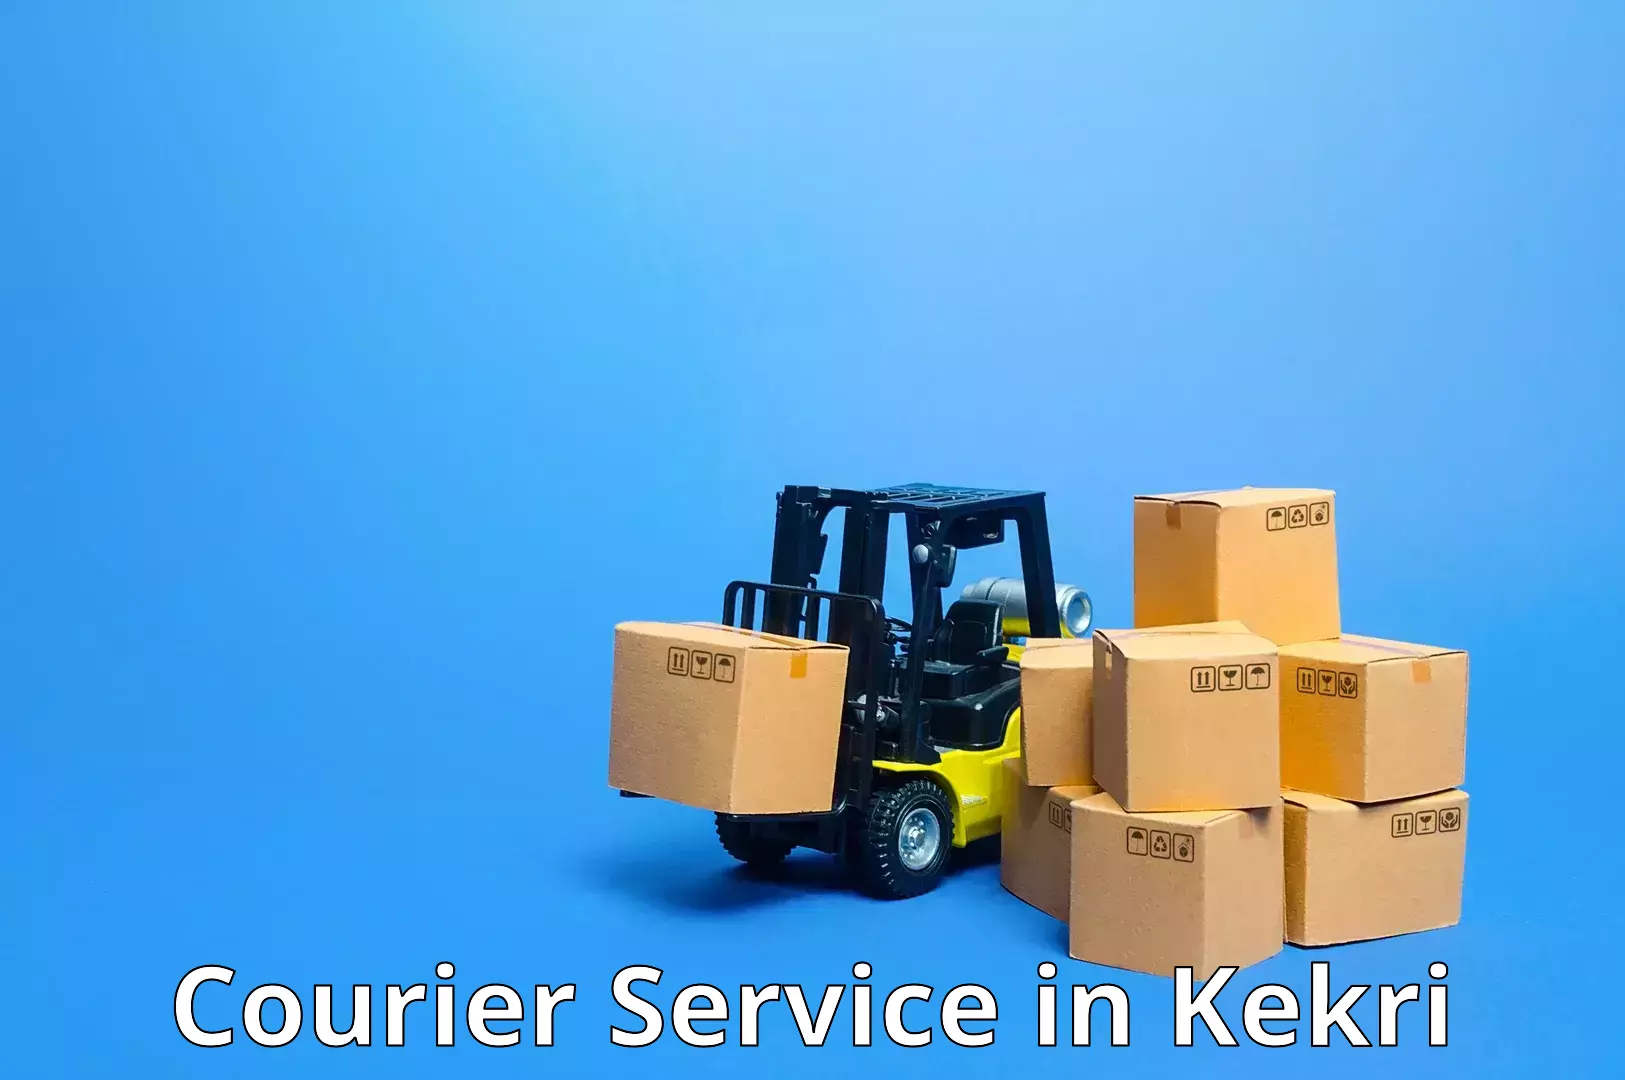 Courier services in Kekri